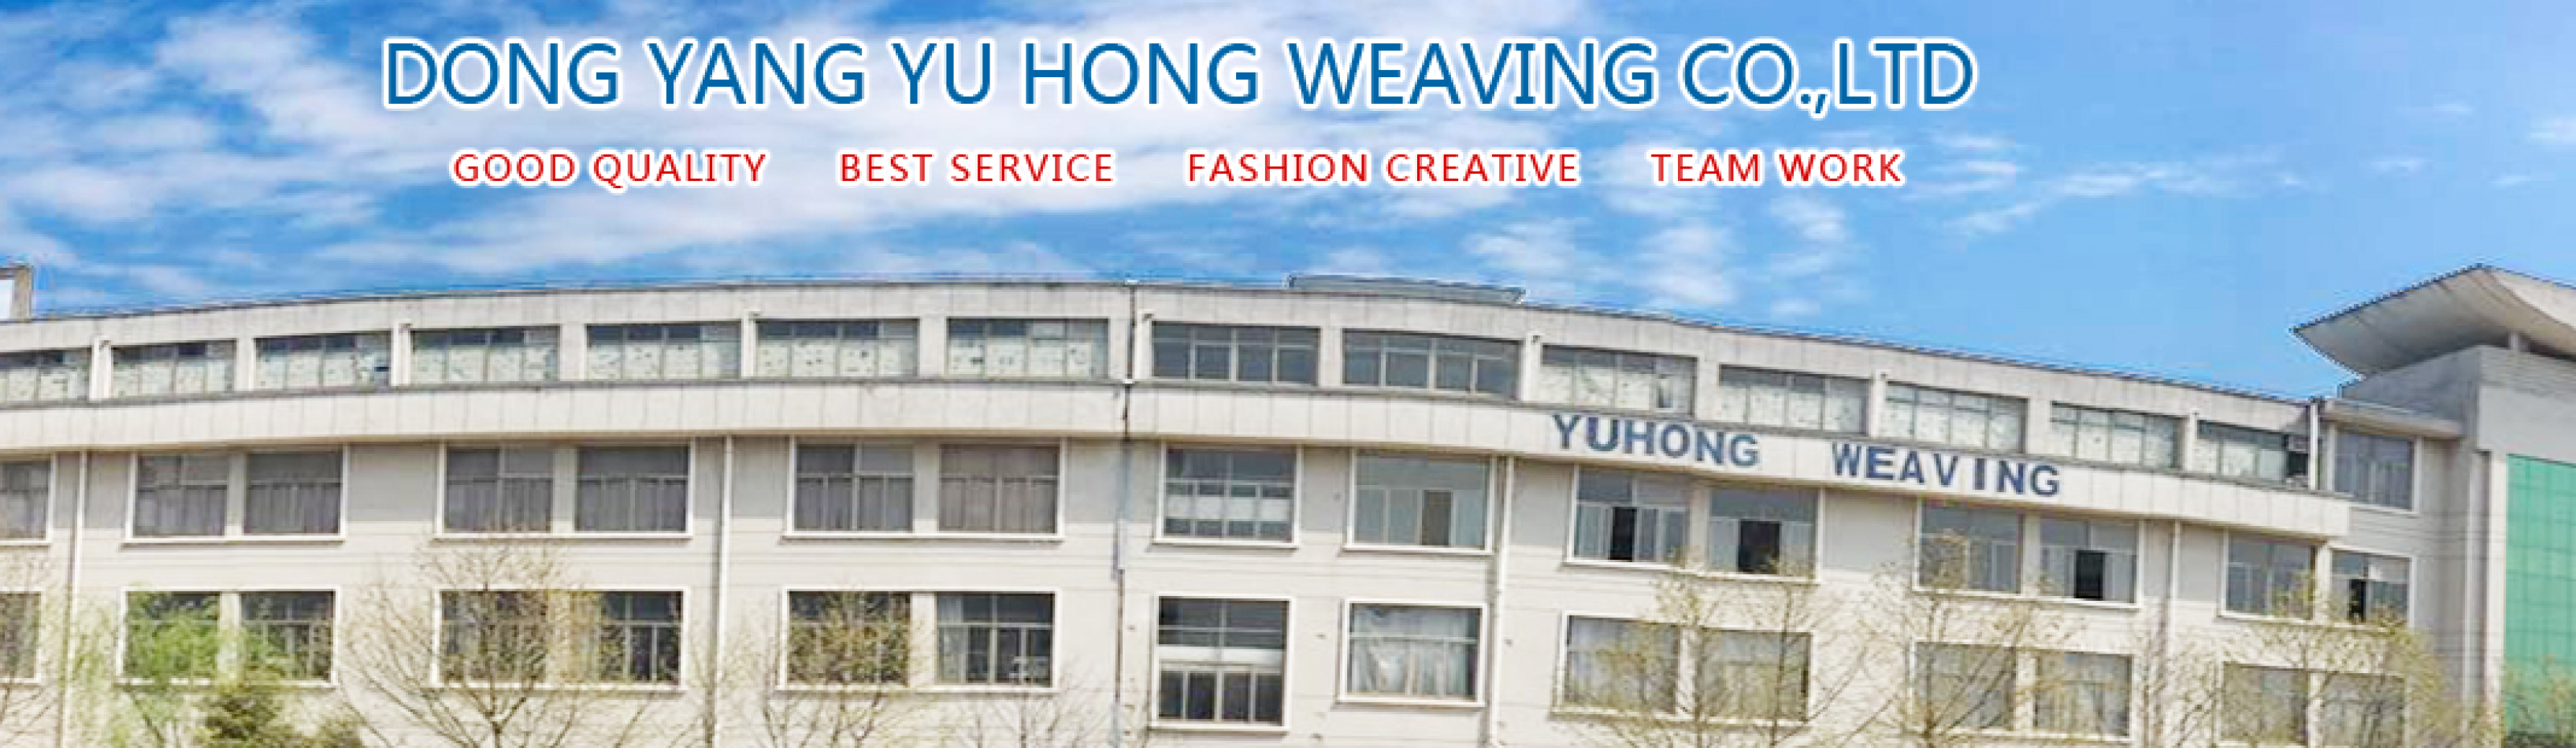 SHAOXING PANHAO KNITTING & TEXTILE CO., LTD.